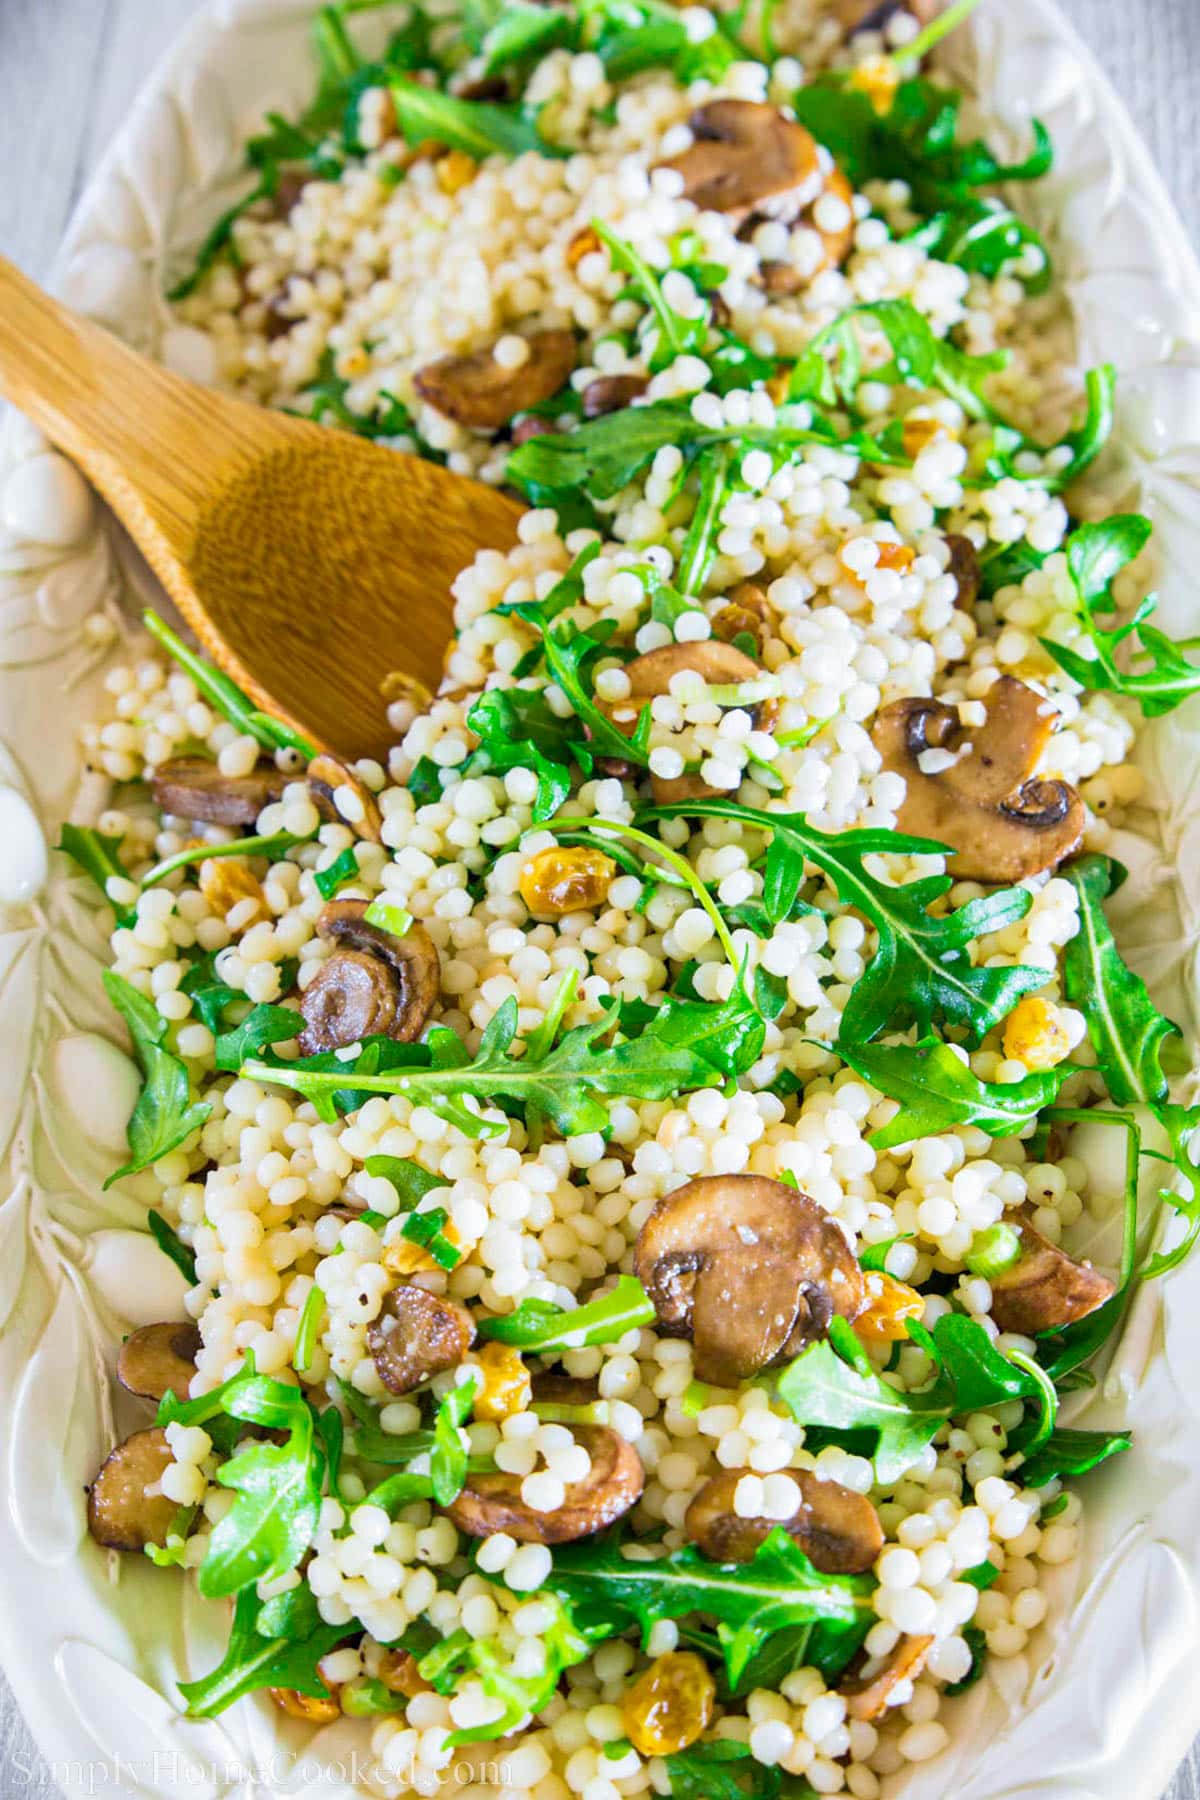 Couscous Arugula Salad and a wooden spoon.